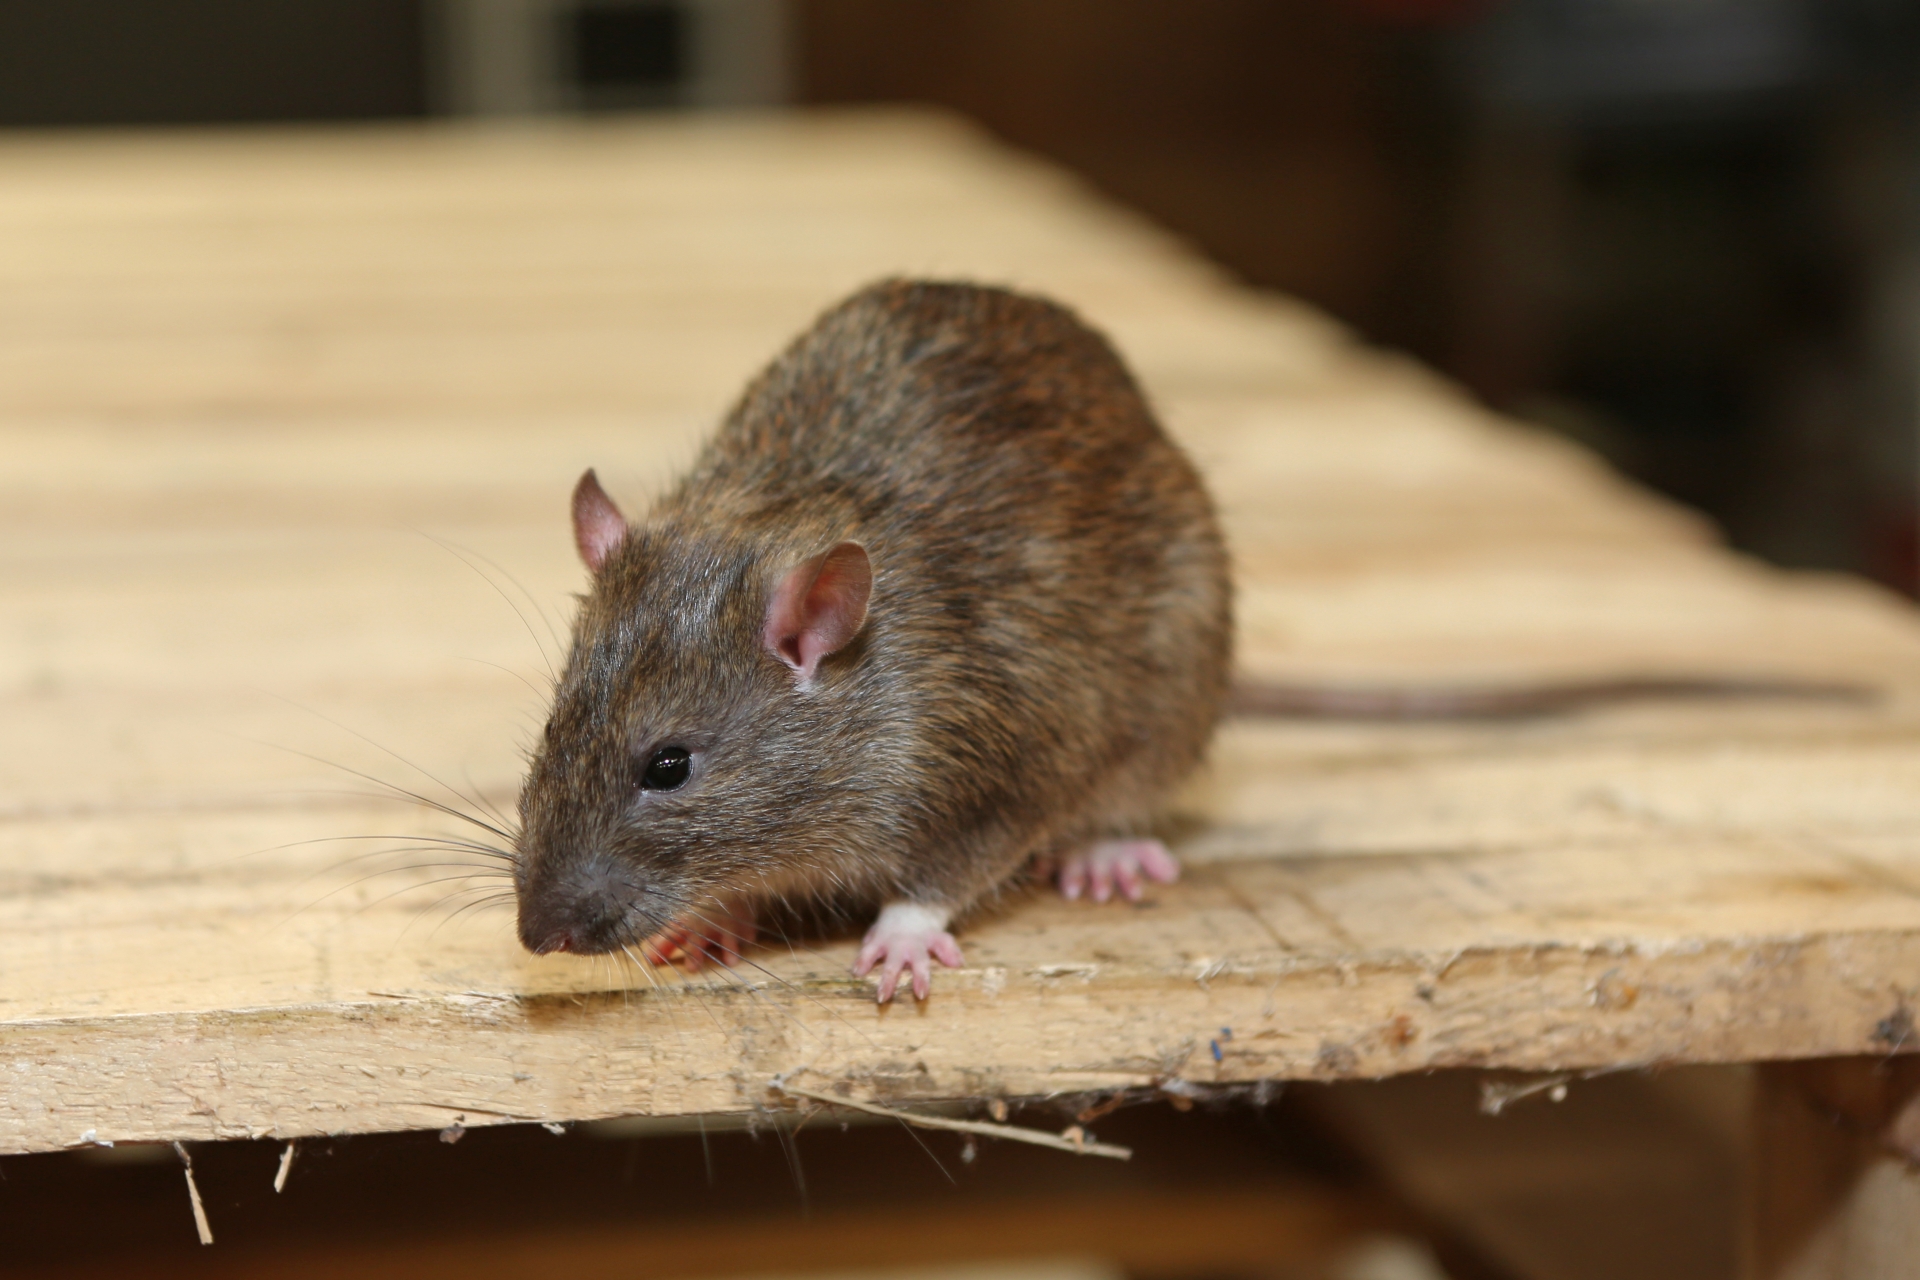 Rat extermination, Pest Control in Wandsworth, SW18. Call Now 020 8166 9746